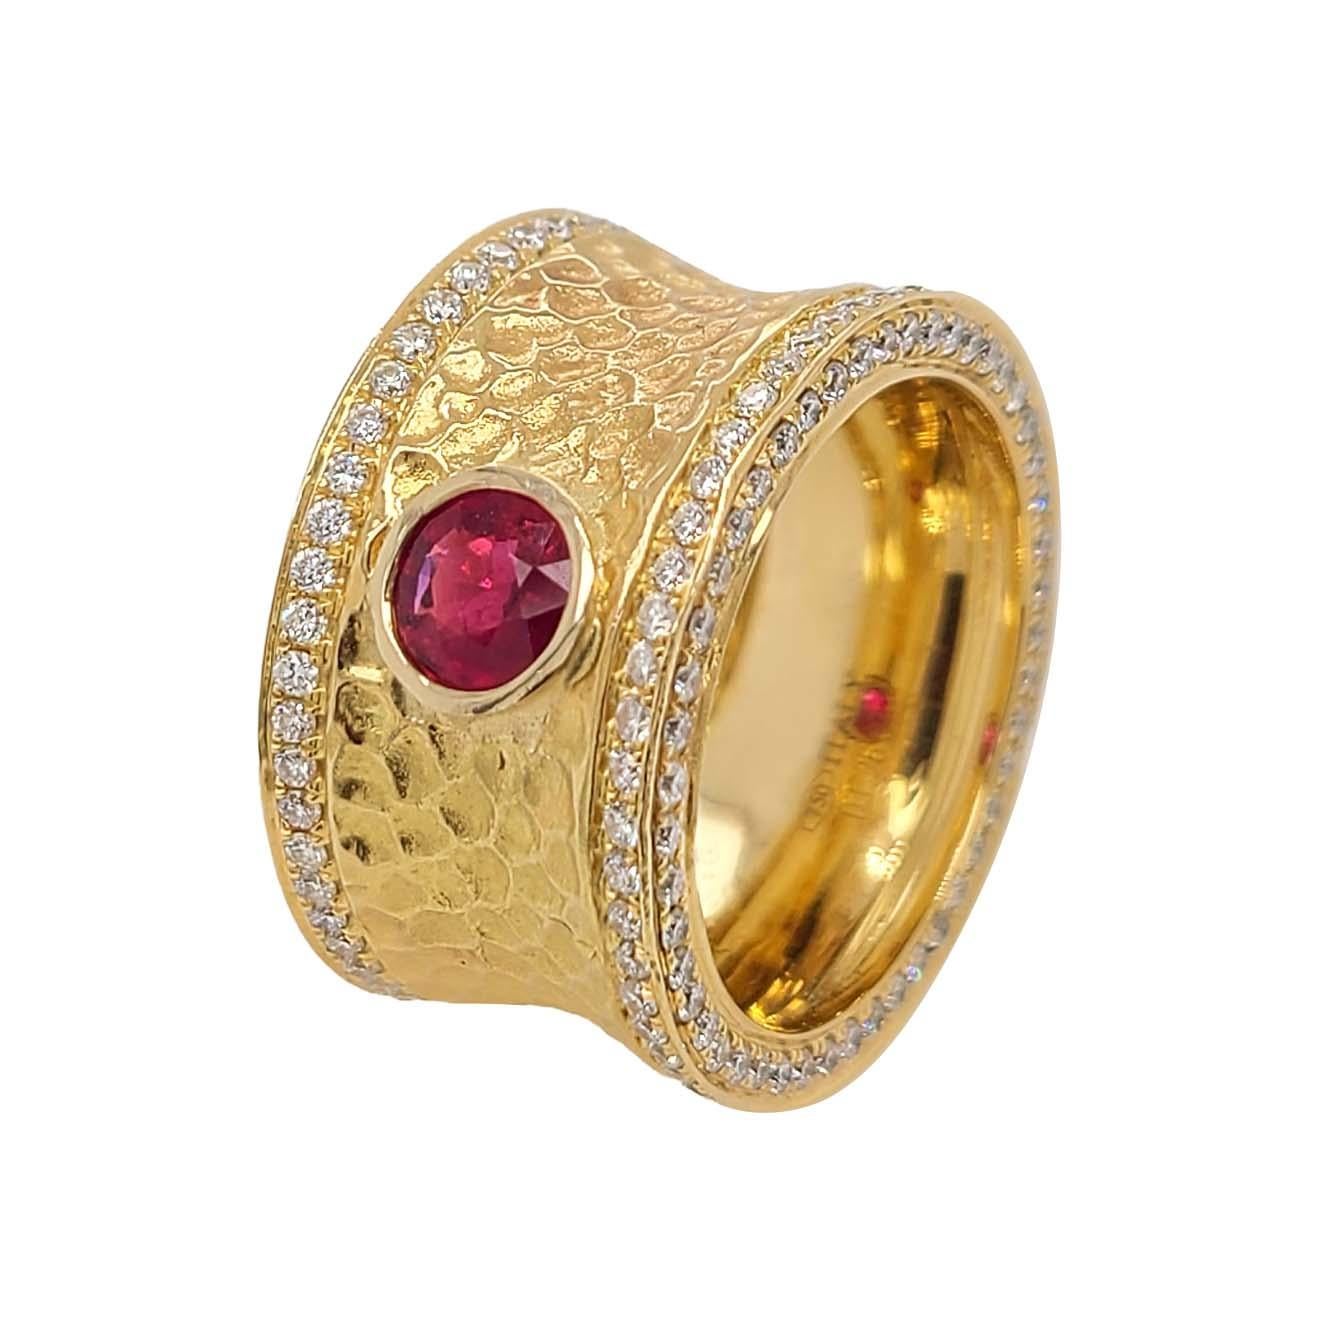 Produced by award winning Italian designer Stefano Vitolo. Stefano creates custom artisanal one of a kind jewelry with excellent gemstones in a truly old world Italian craftmanship.
This handcrafted ring has 1.26 total carat weight of F/G color and